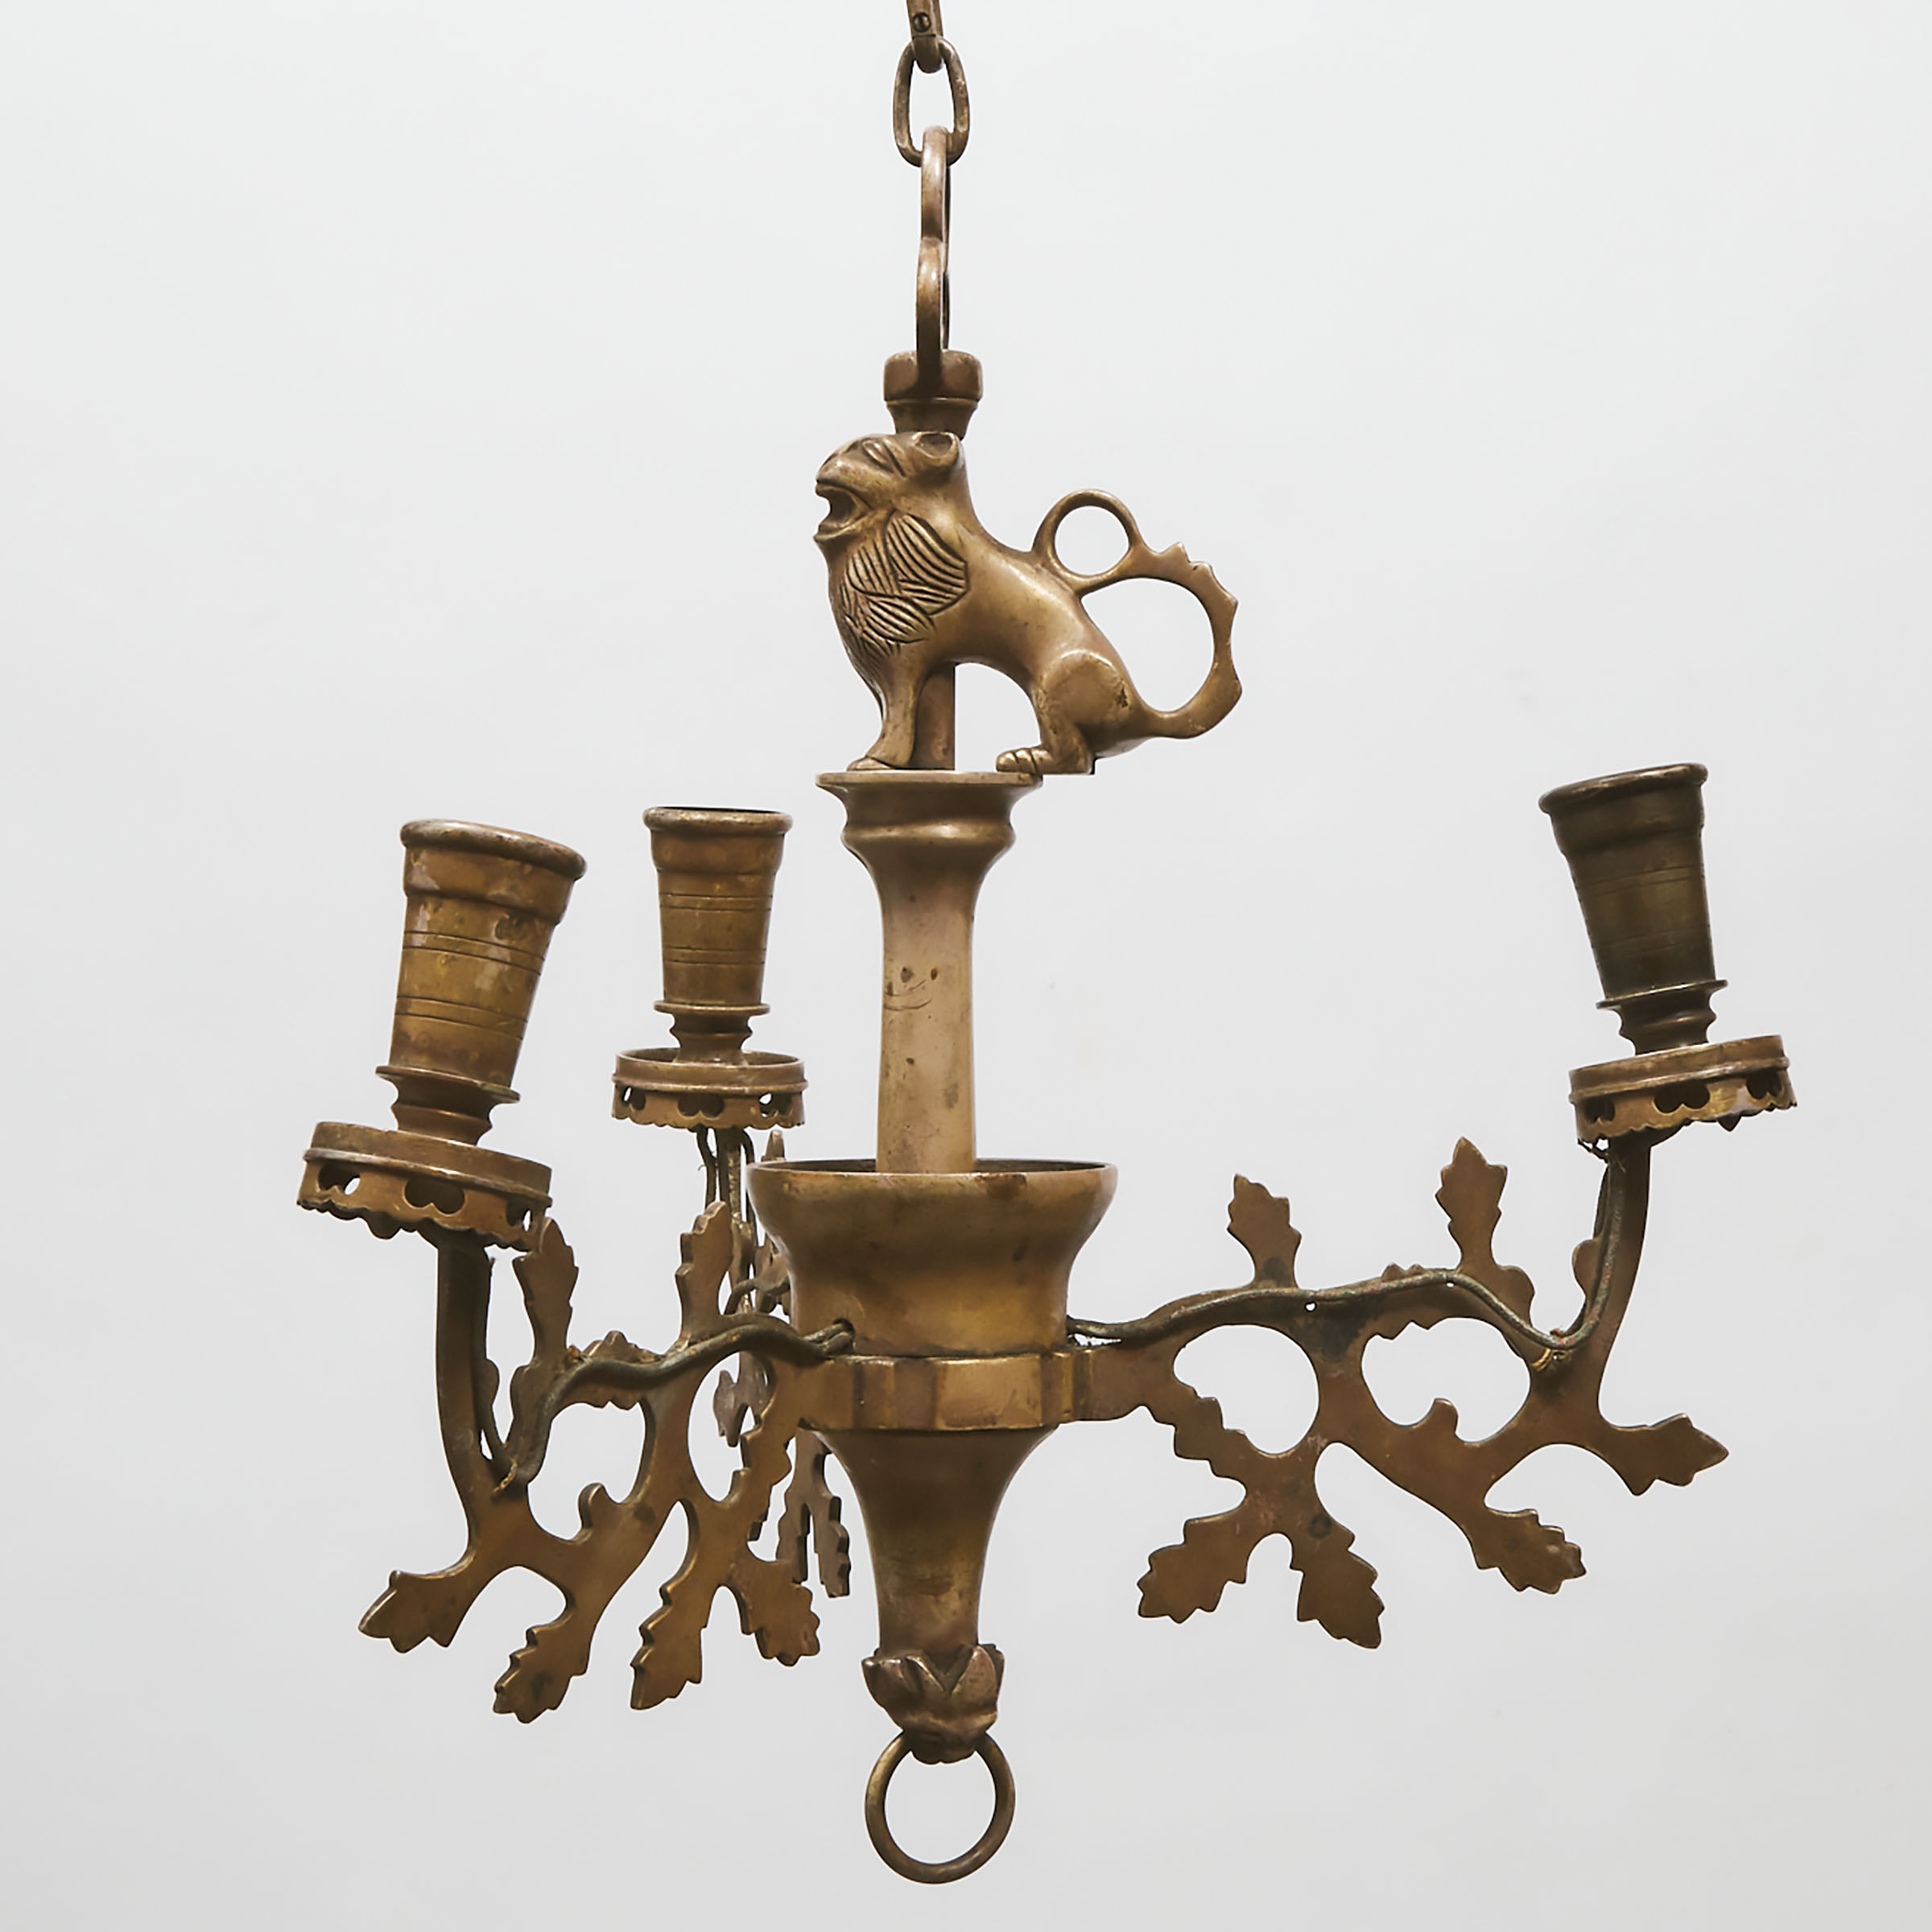 15th century North German Gothic Style Silvered Bronze Chandelier, 19th/early 20th century